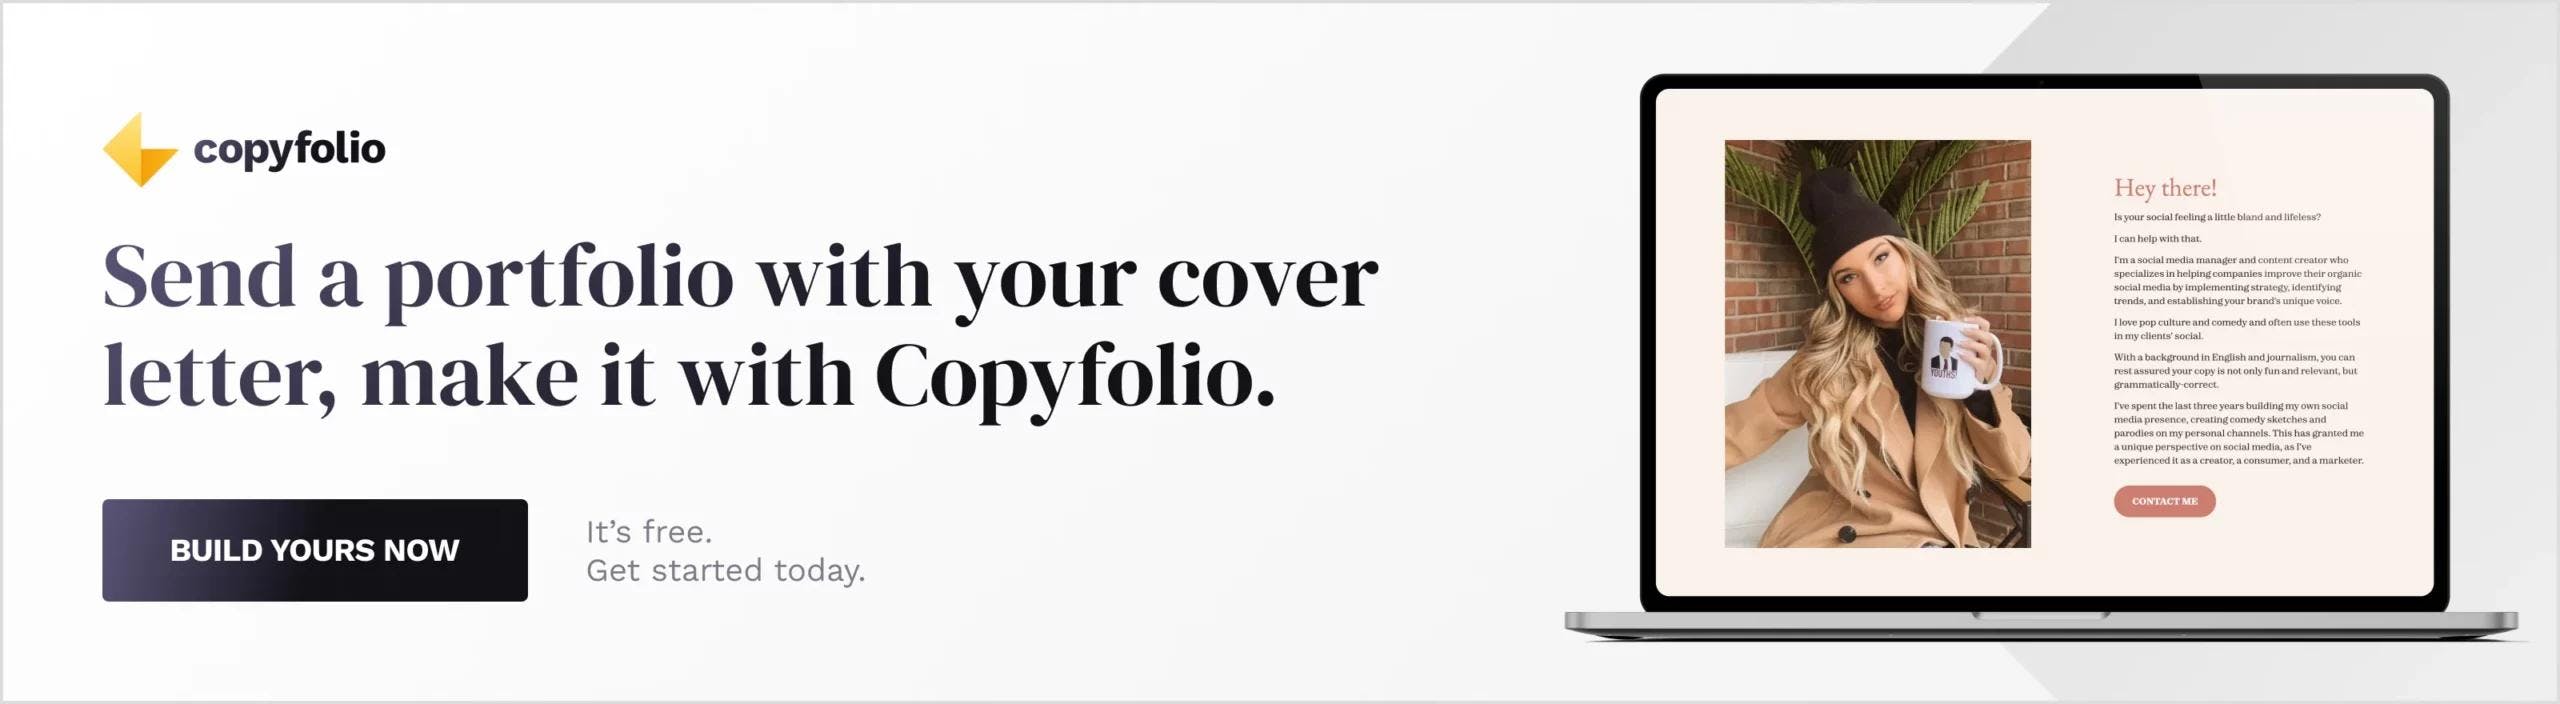 Banner, saying: Send a portfolio with your cover letter, make it with Copyfolio. Underneath this tagline is a button saying 